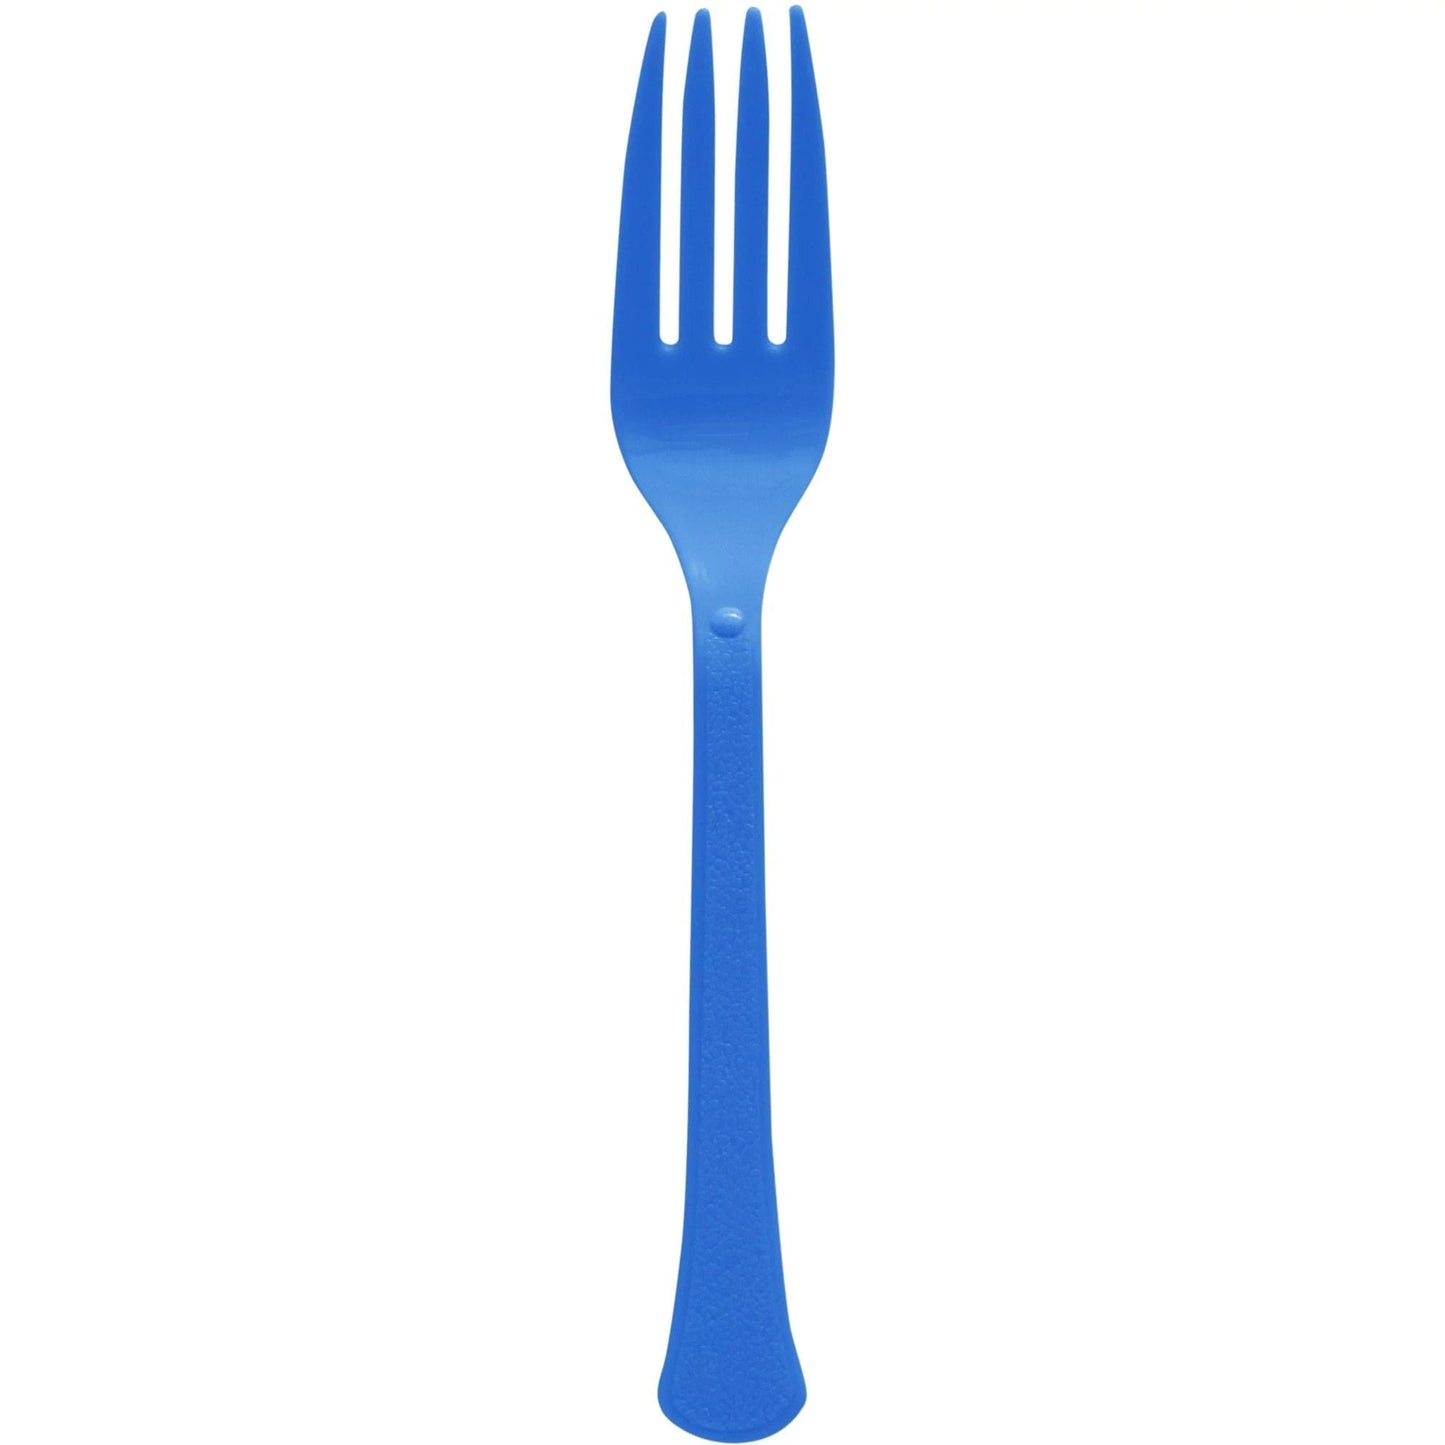 Boxed, Heavy Weight Forks - Bright Royal Blue